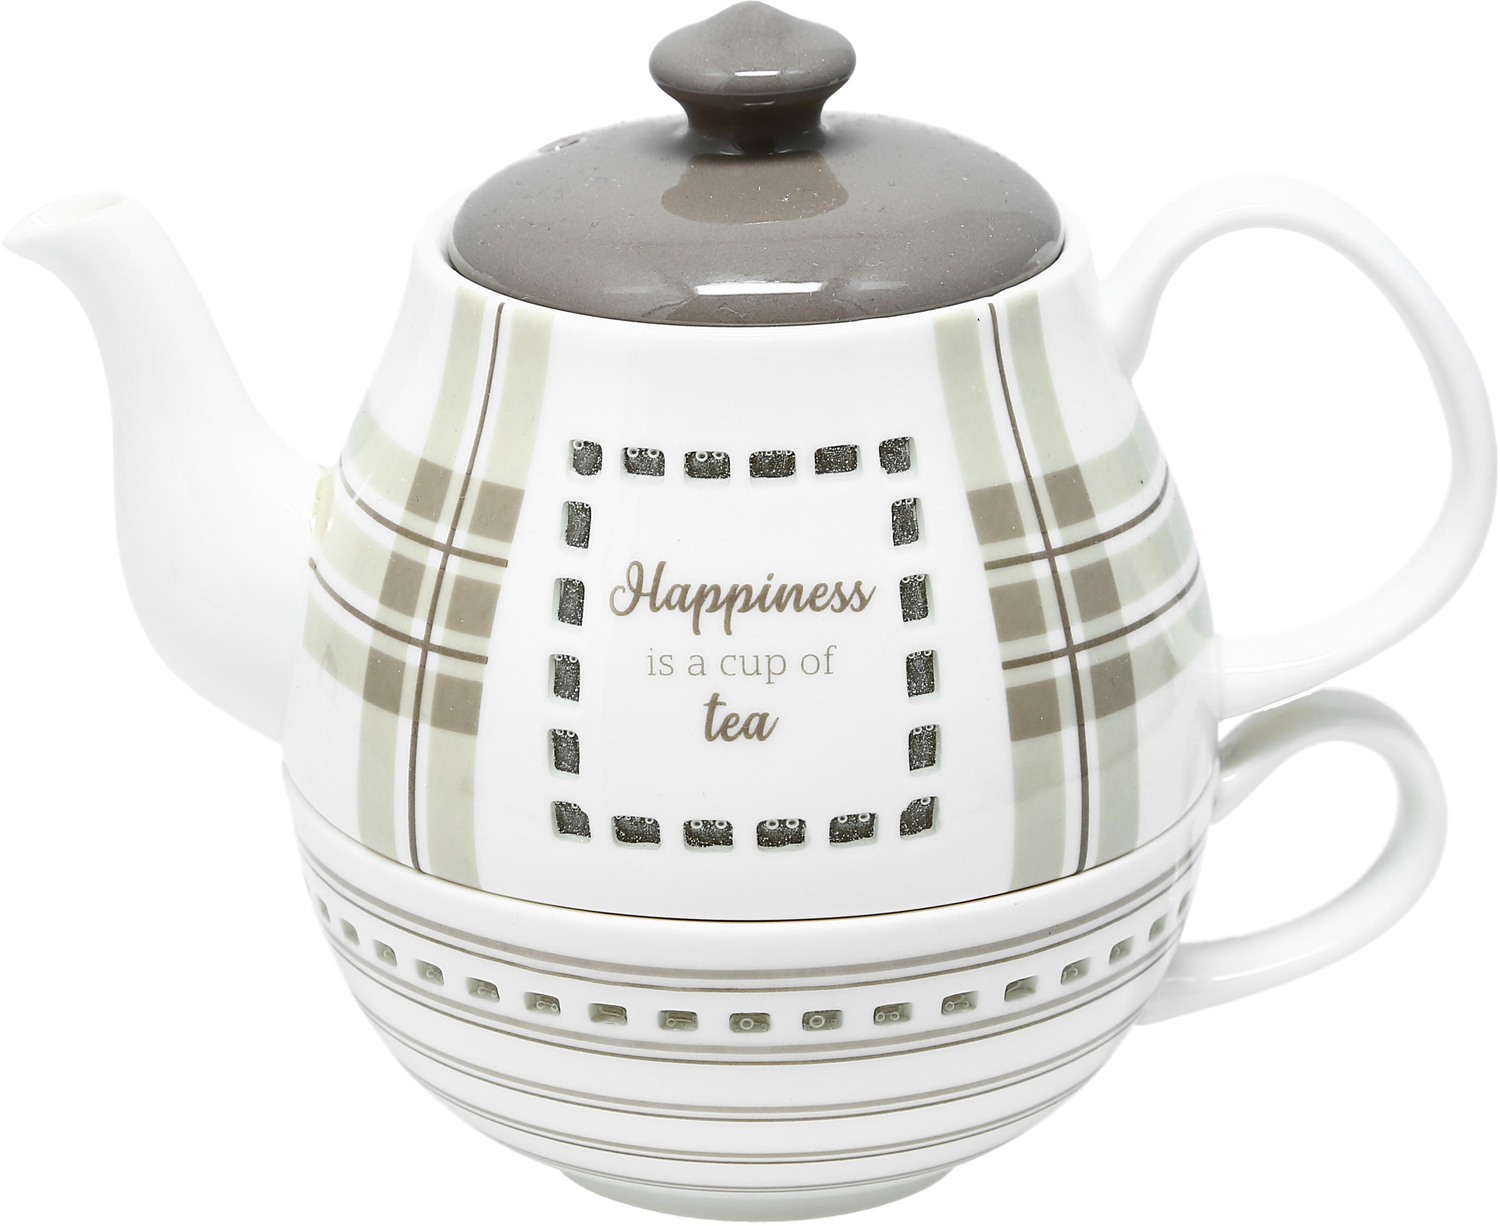 Happiness by Farmhouse Family - Happiness - Tea for One Set
(17 oz Teapot & 8.5 oz Cup)